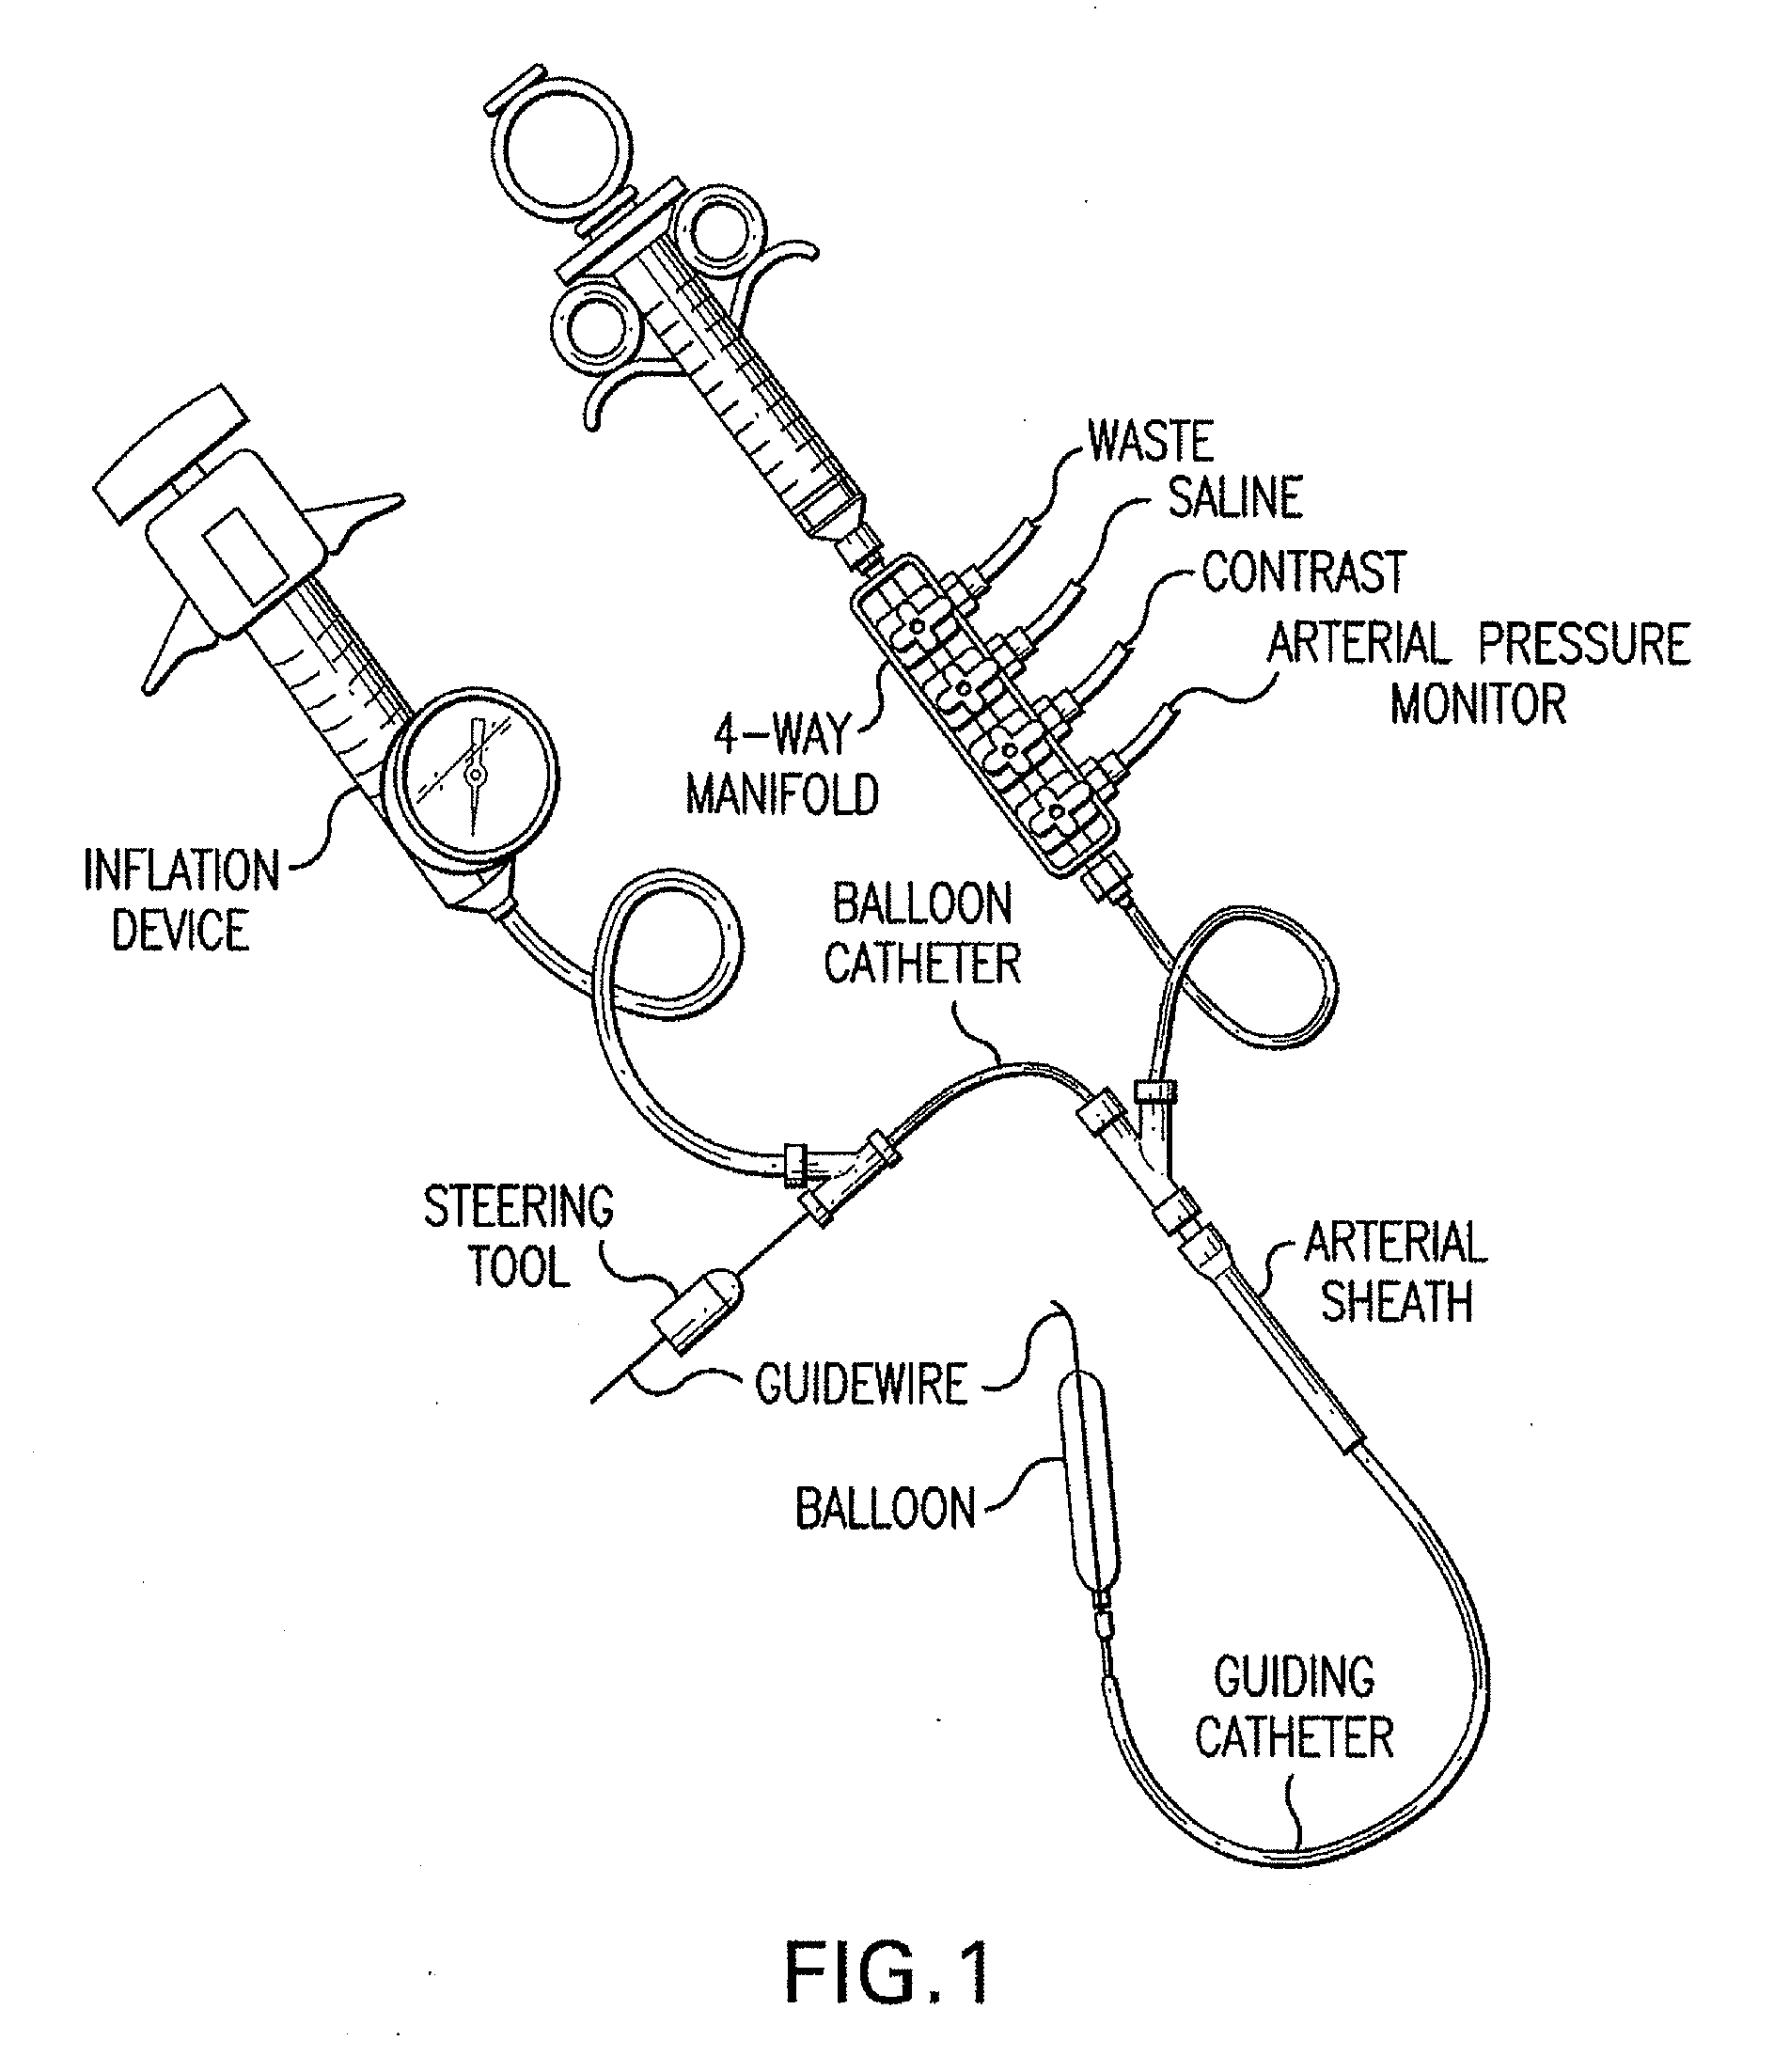 Method of treating vascular disease at a bifurcated vessel using a coated balloon